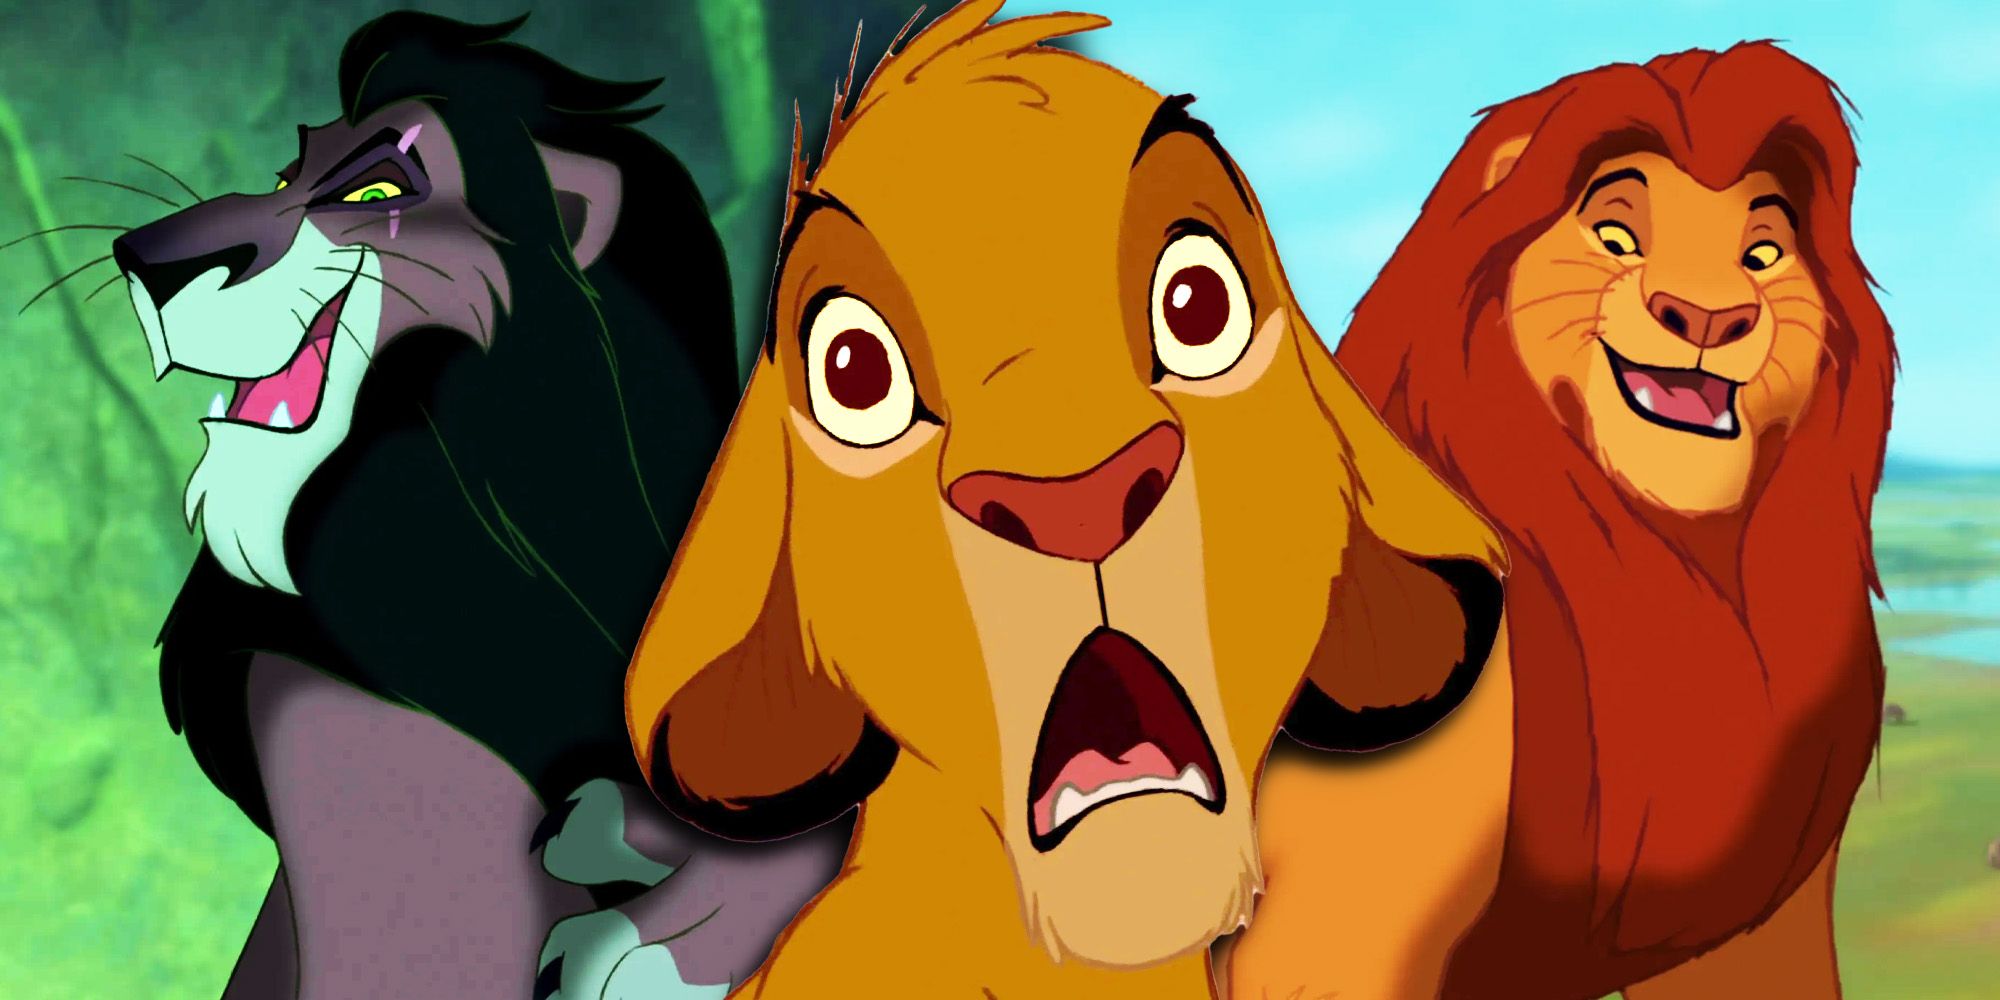 The Lion King Scar singing next to a scared Simba and happy Mufasa